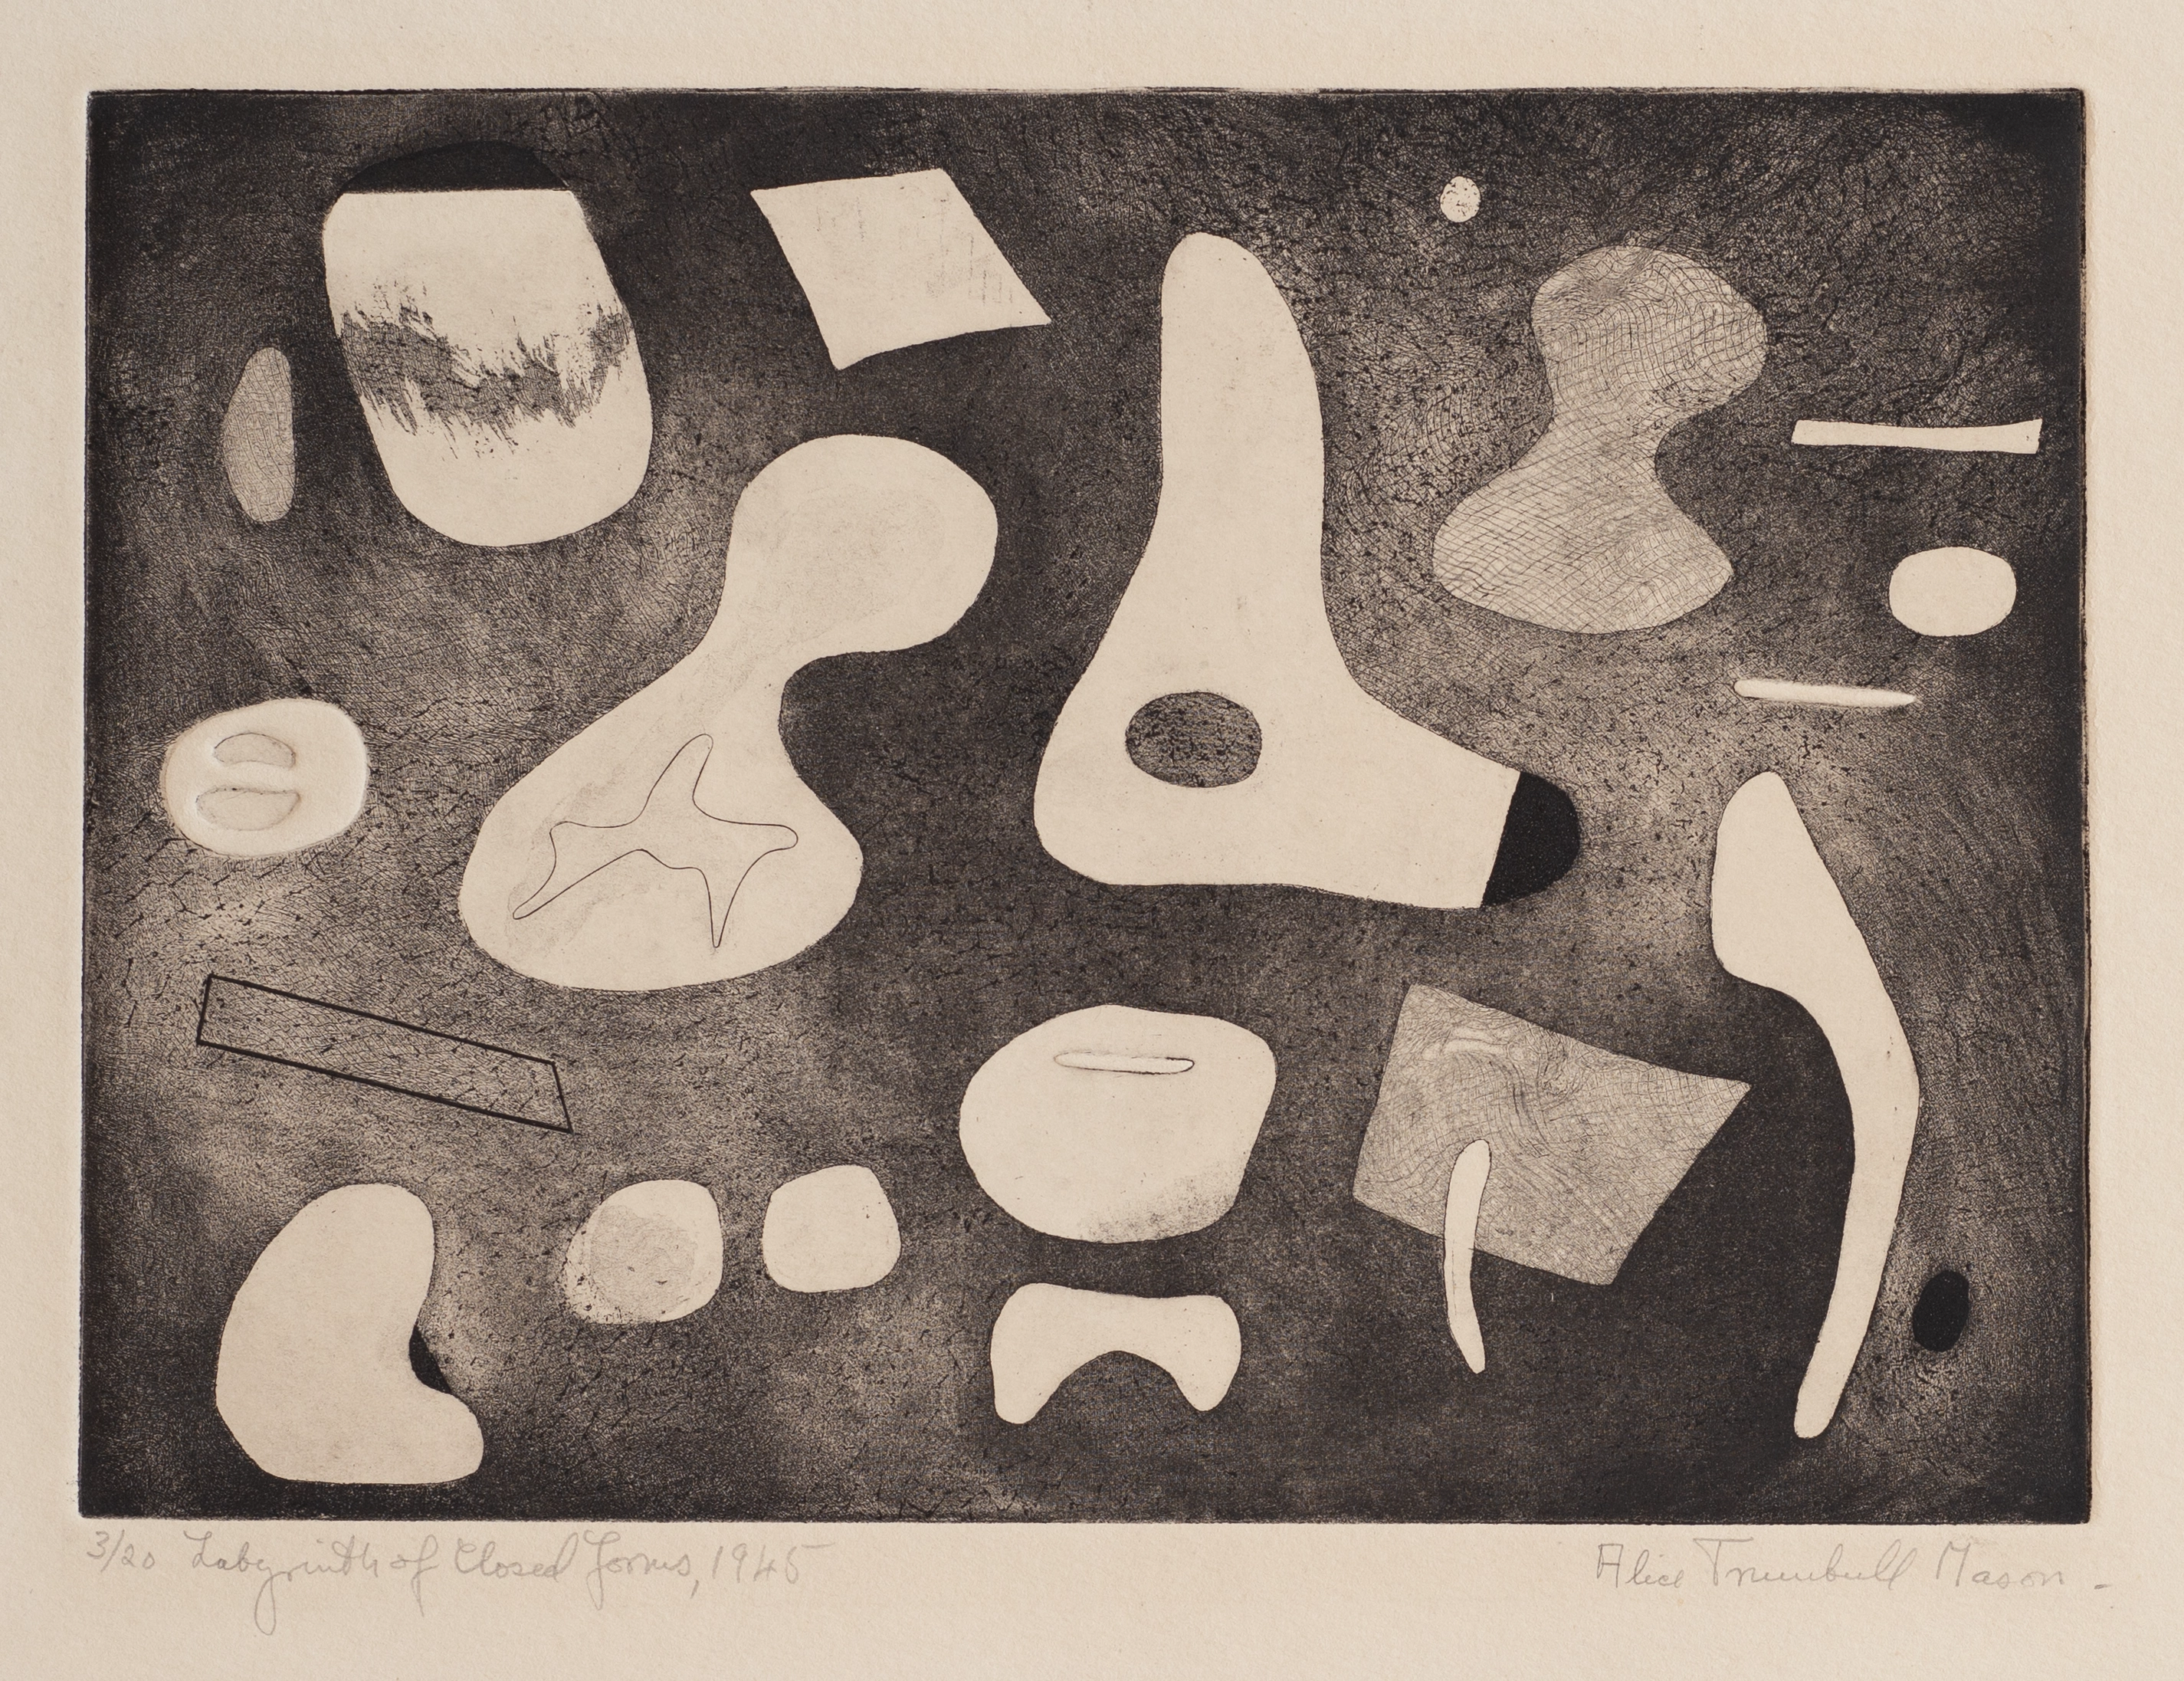 An etching of biomorphic shapes that are black, white, and shades of grey.